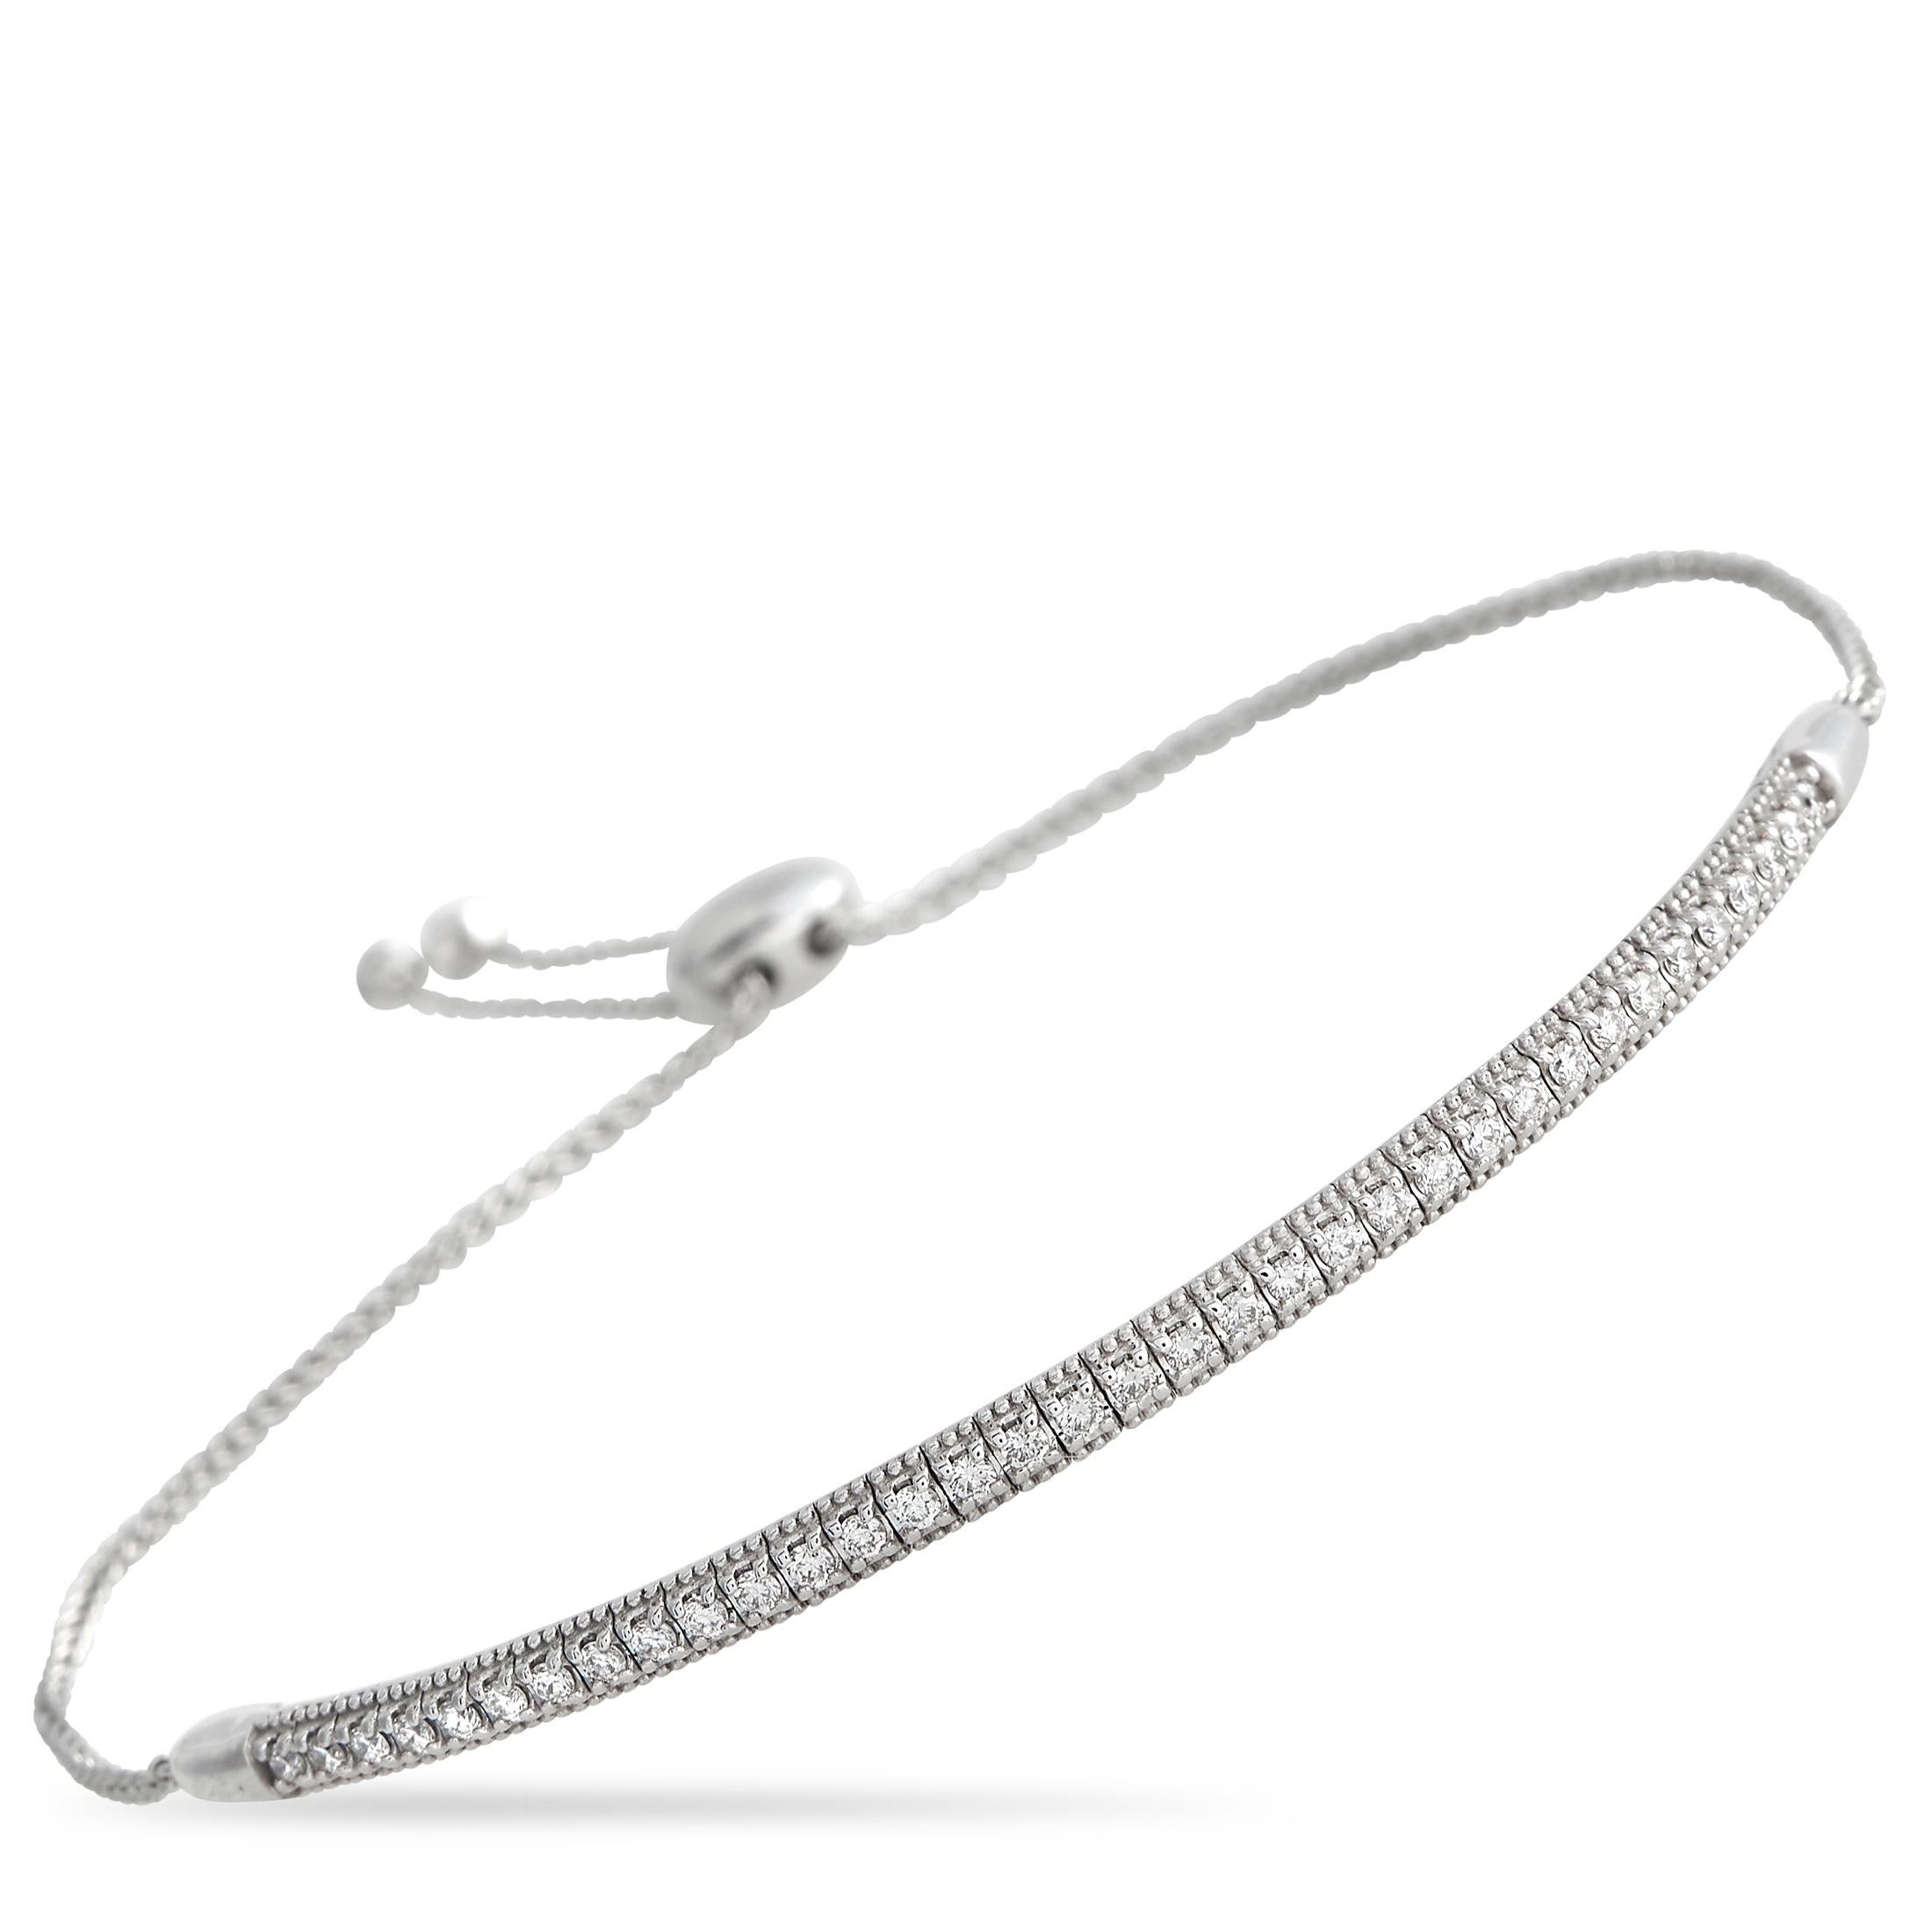 LB Exclusive 14K White Gold 0.36 Ct Diamond Bracelet In New Condition For Sale In Southampton, PA